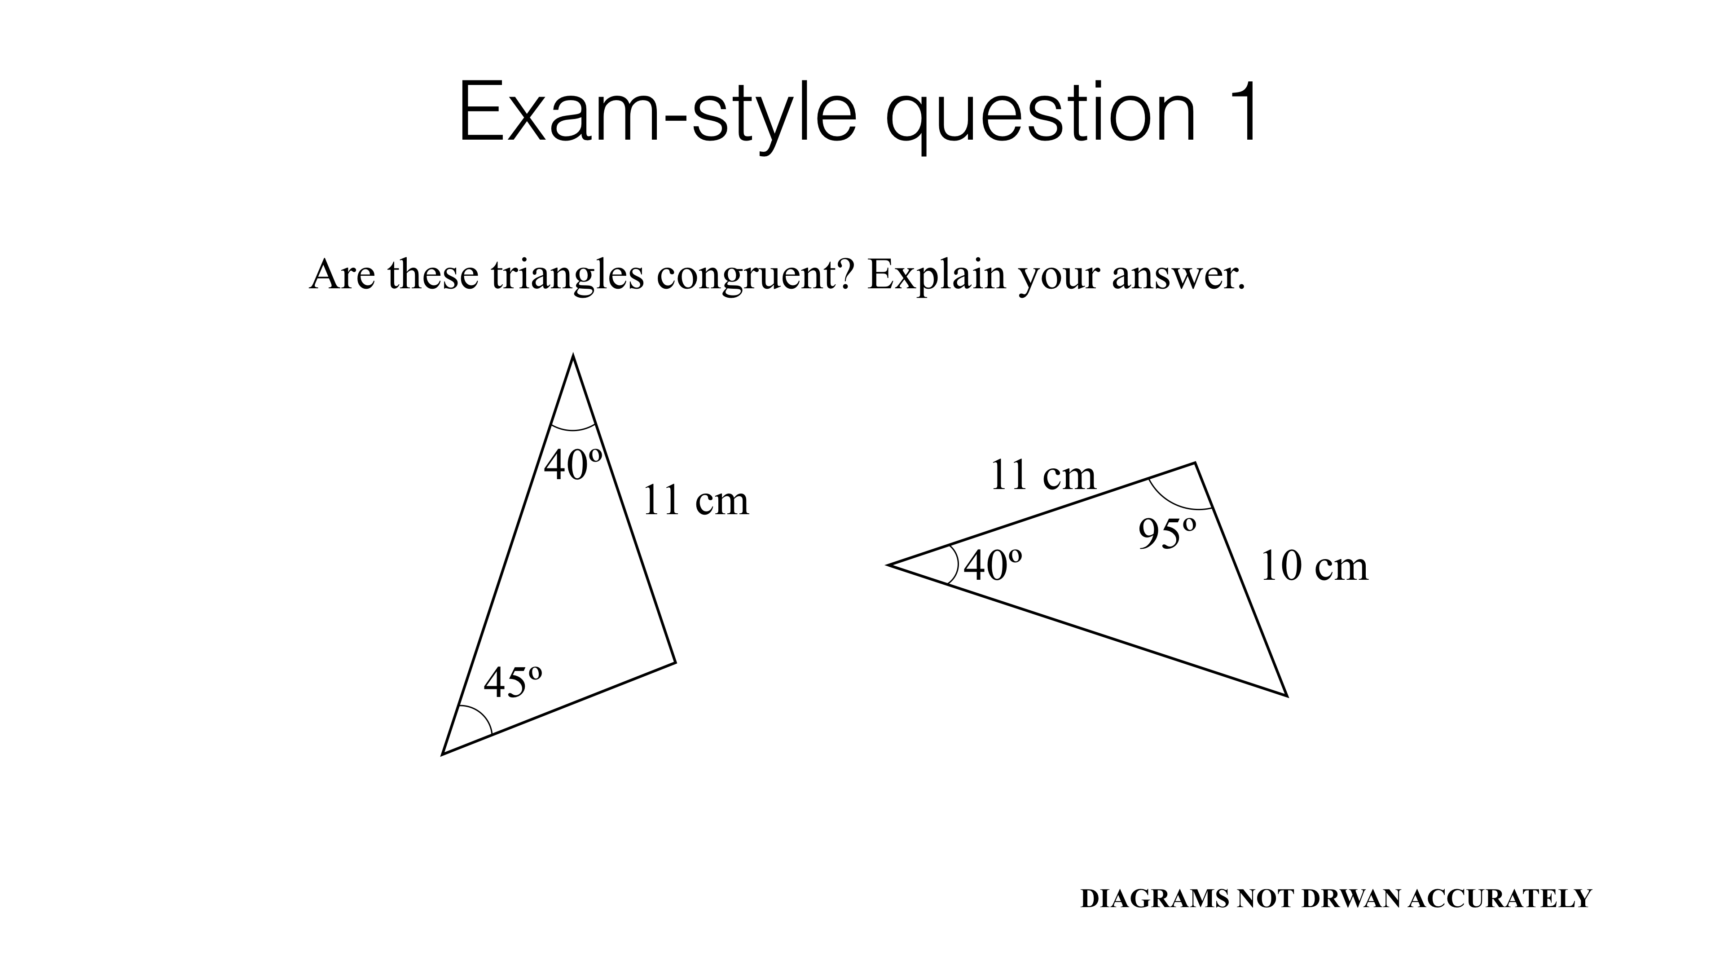 geometry-worksheet-congruent-triangles-sss-and-sas-answers-db-excel